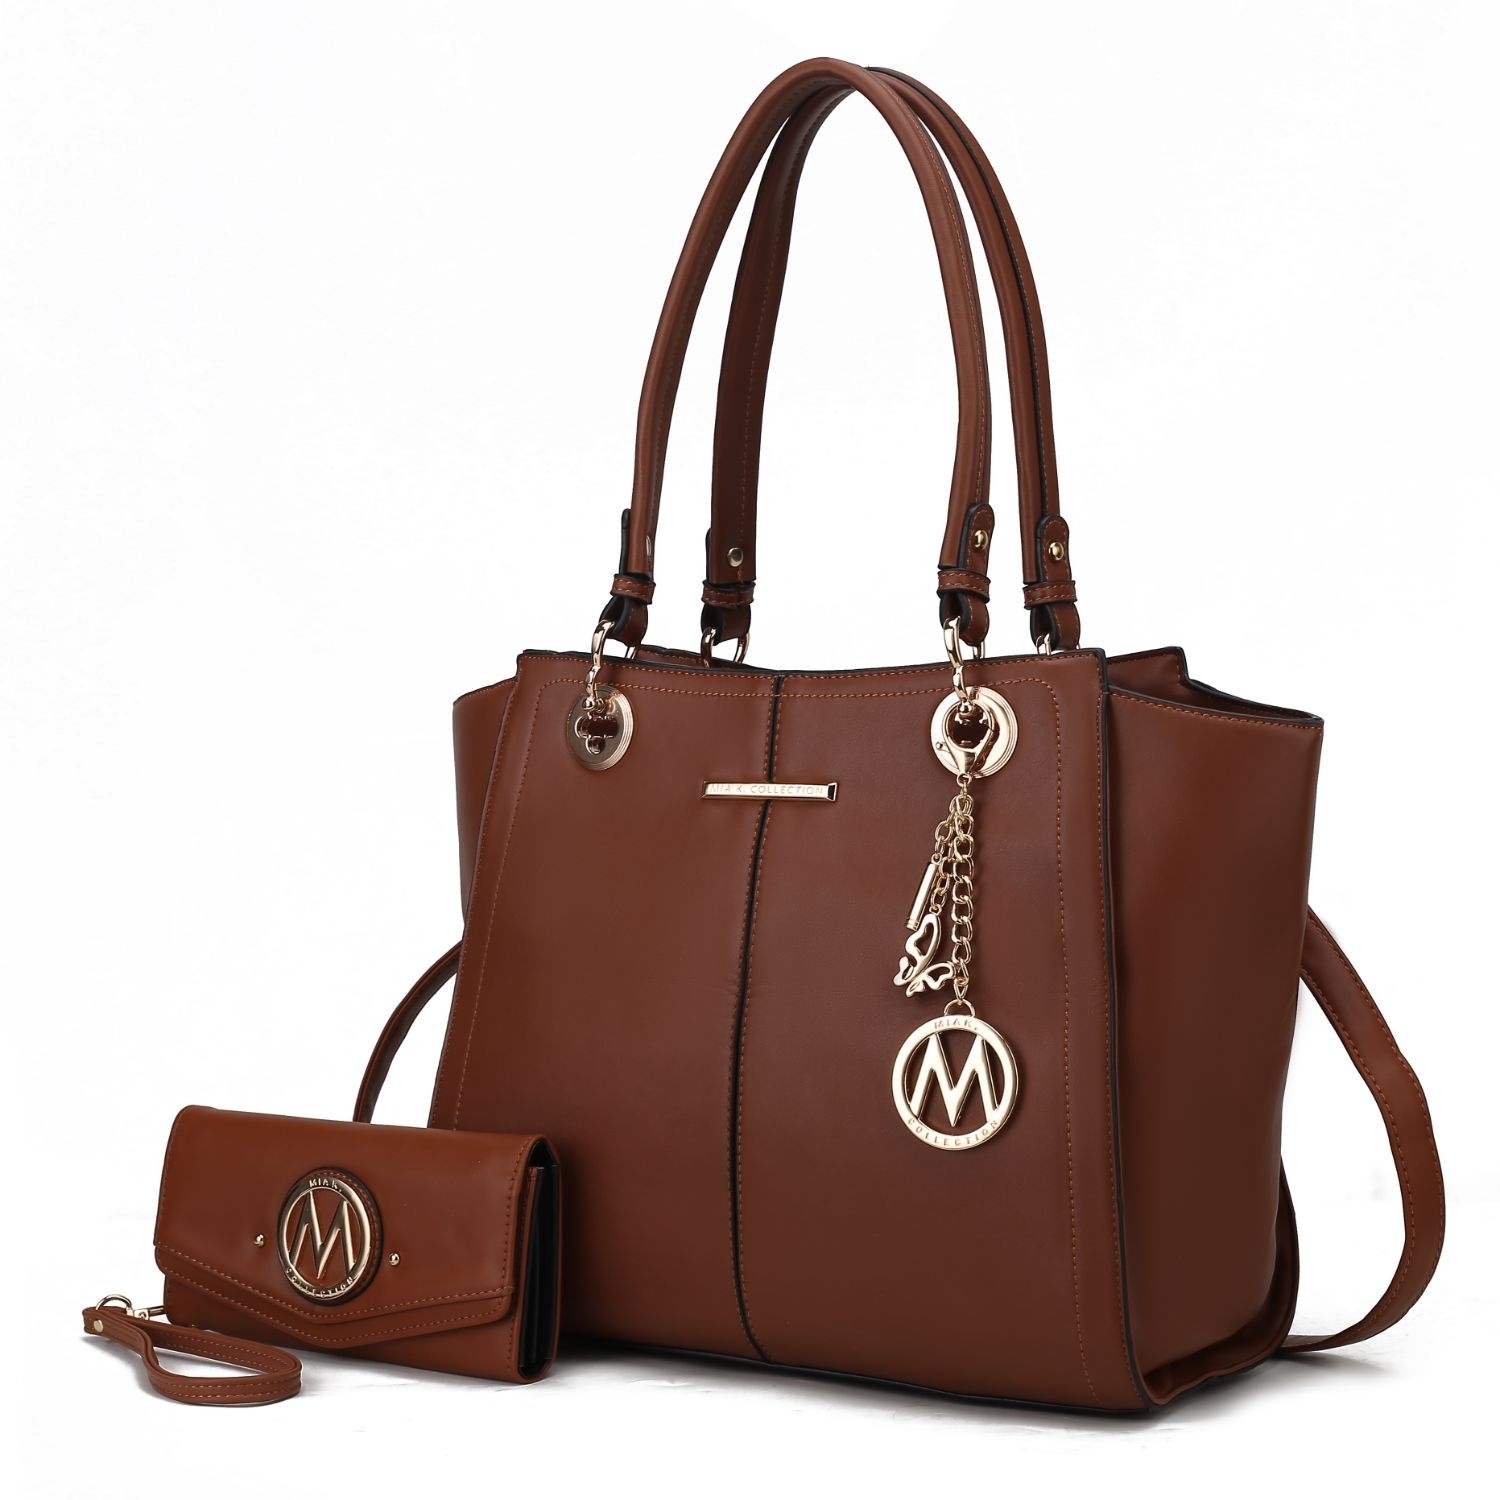 MKF Collection Ivy Vegan Leather Women's Tote Handbag By Mia K With Wallet -2 Pieces - Brown